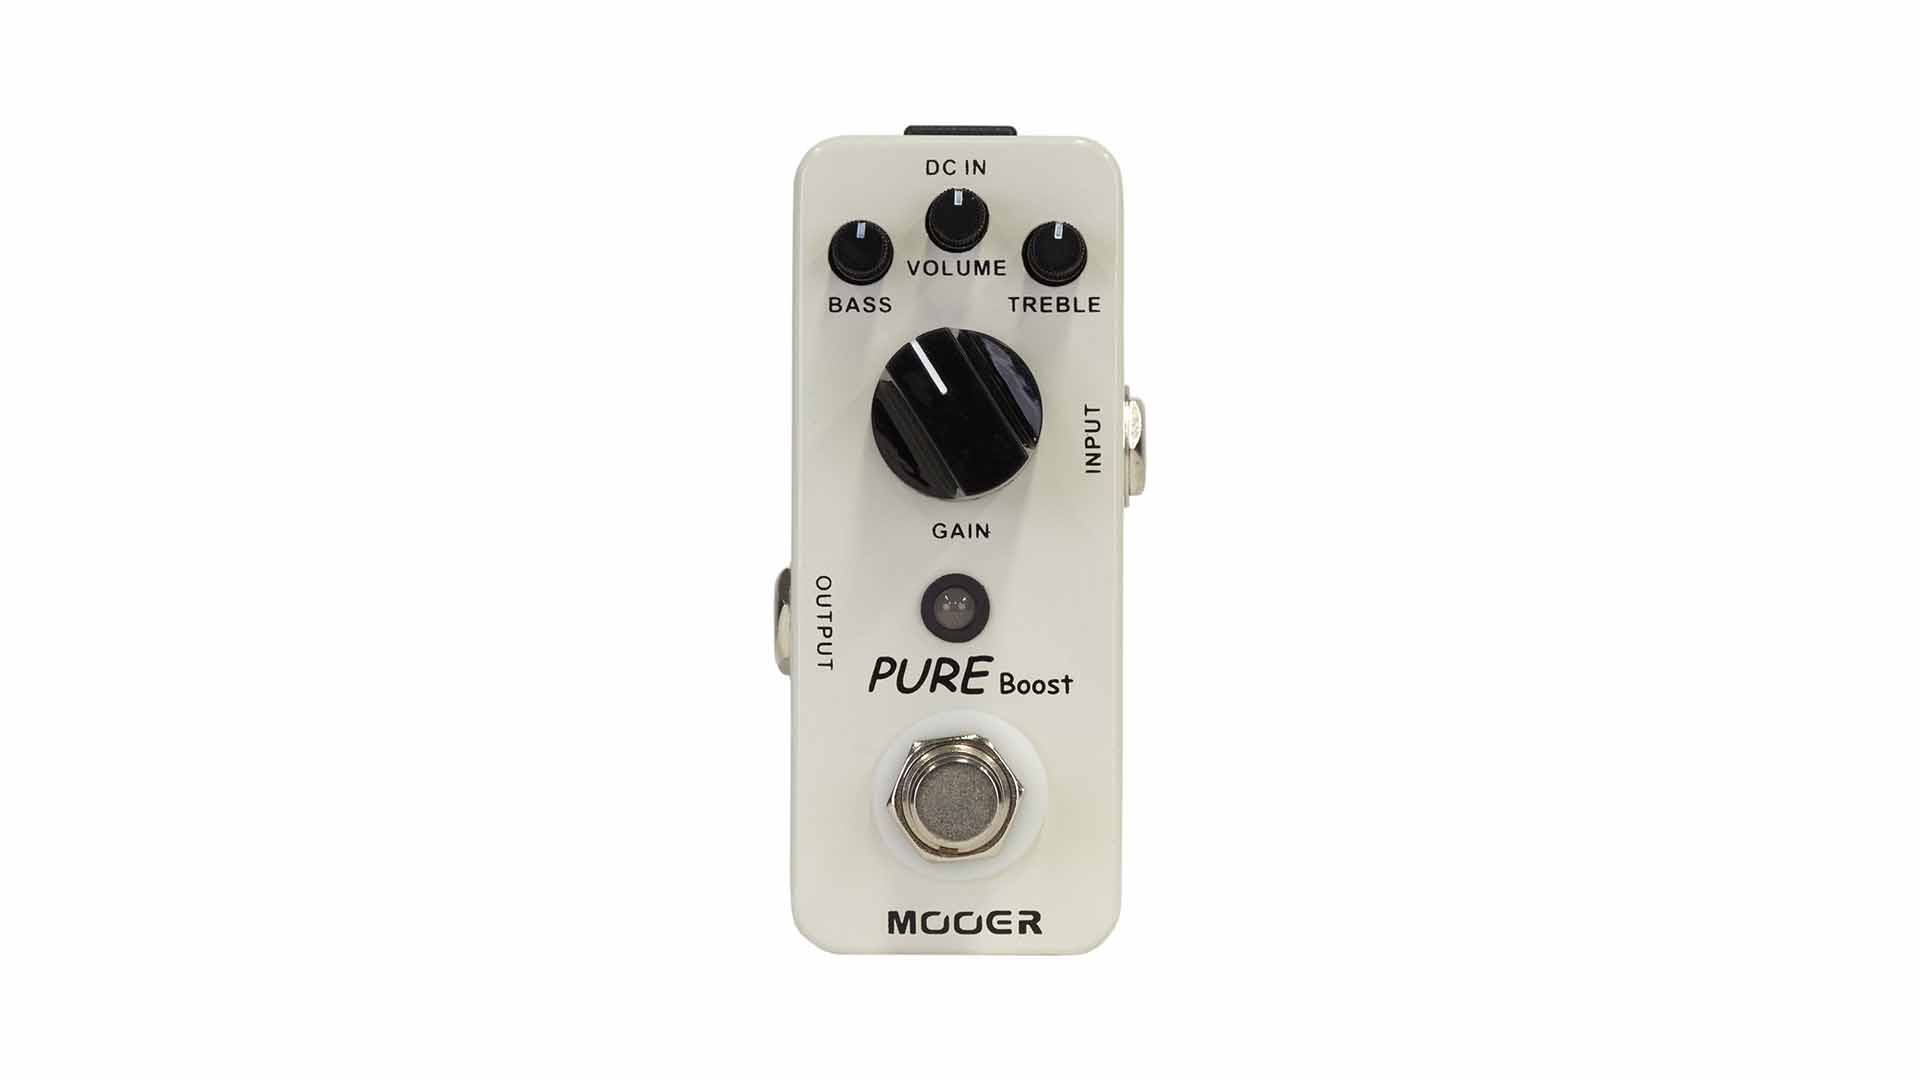 New Mooer Pure Boost Clean Boost Micro Guitar Effects Pedal! 